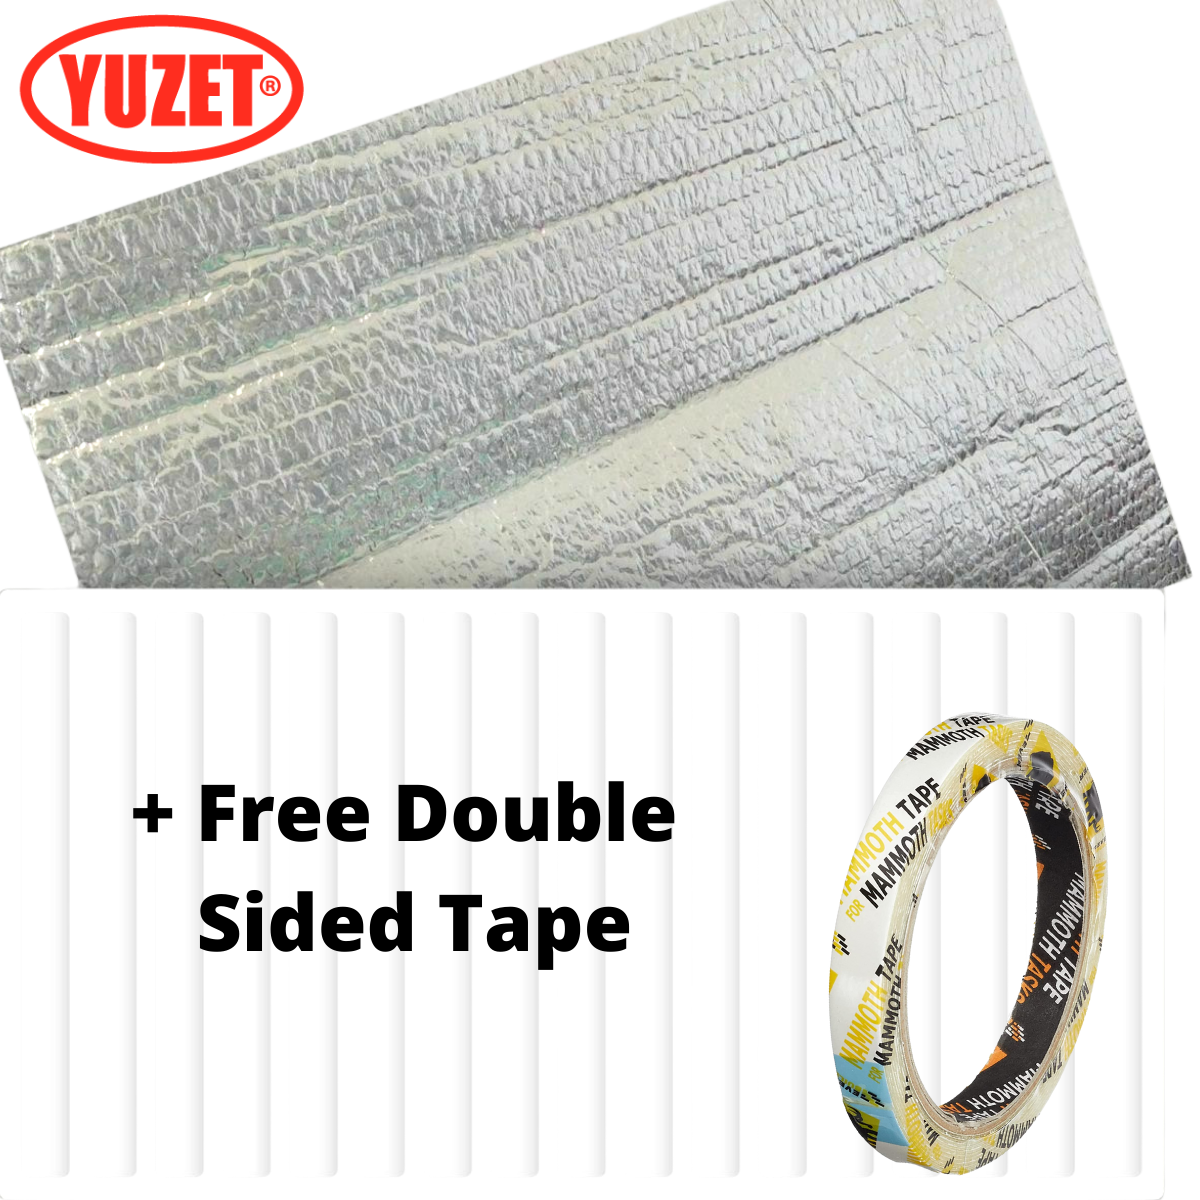 Yuzet 5m Radiator Heat Reflective Insulating Foil with Free Doublesided Tape